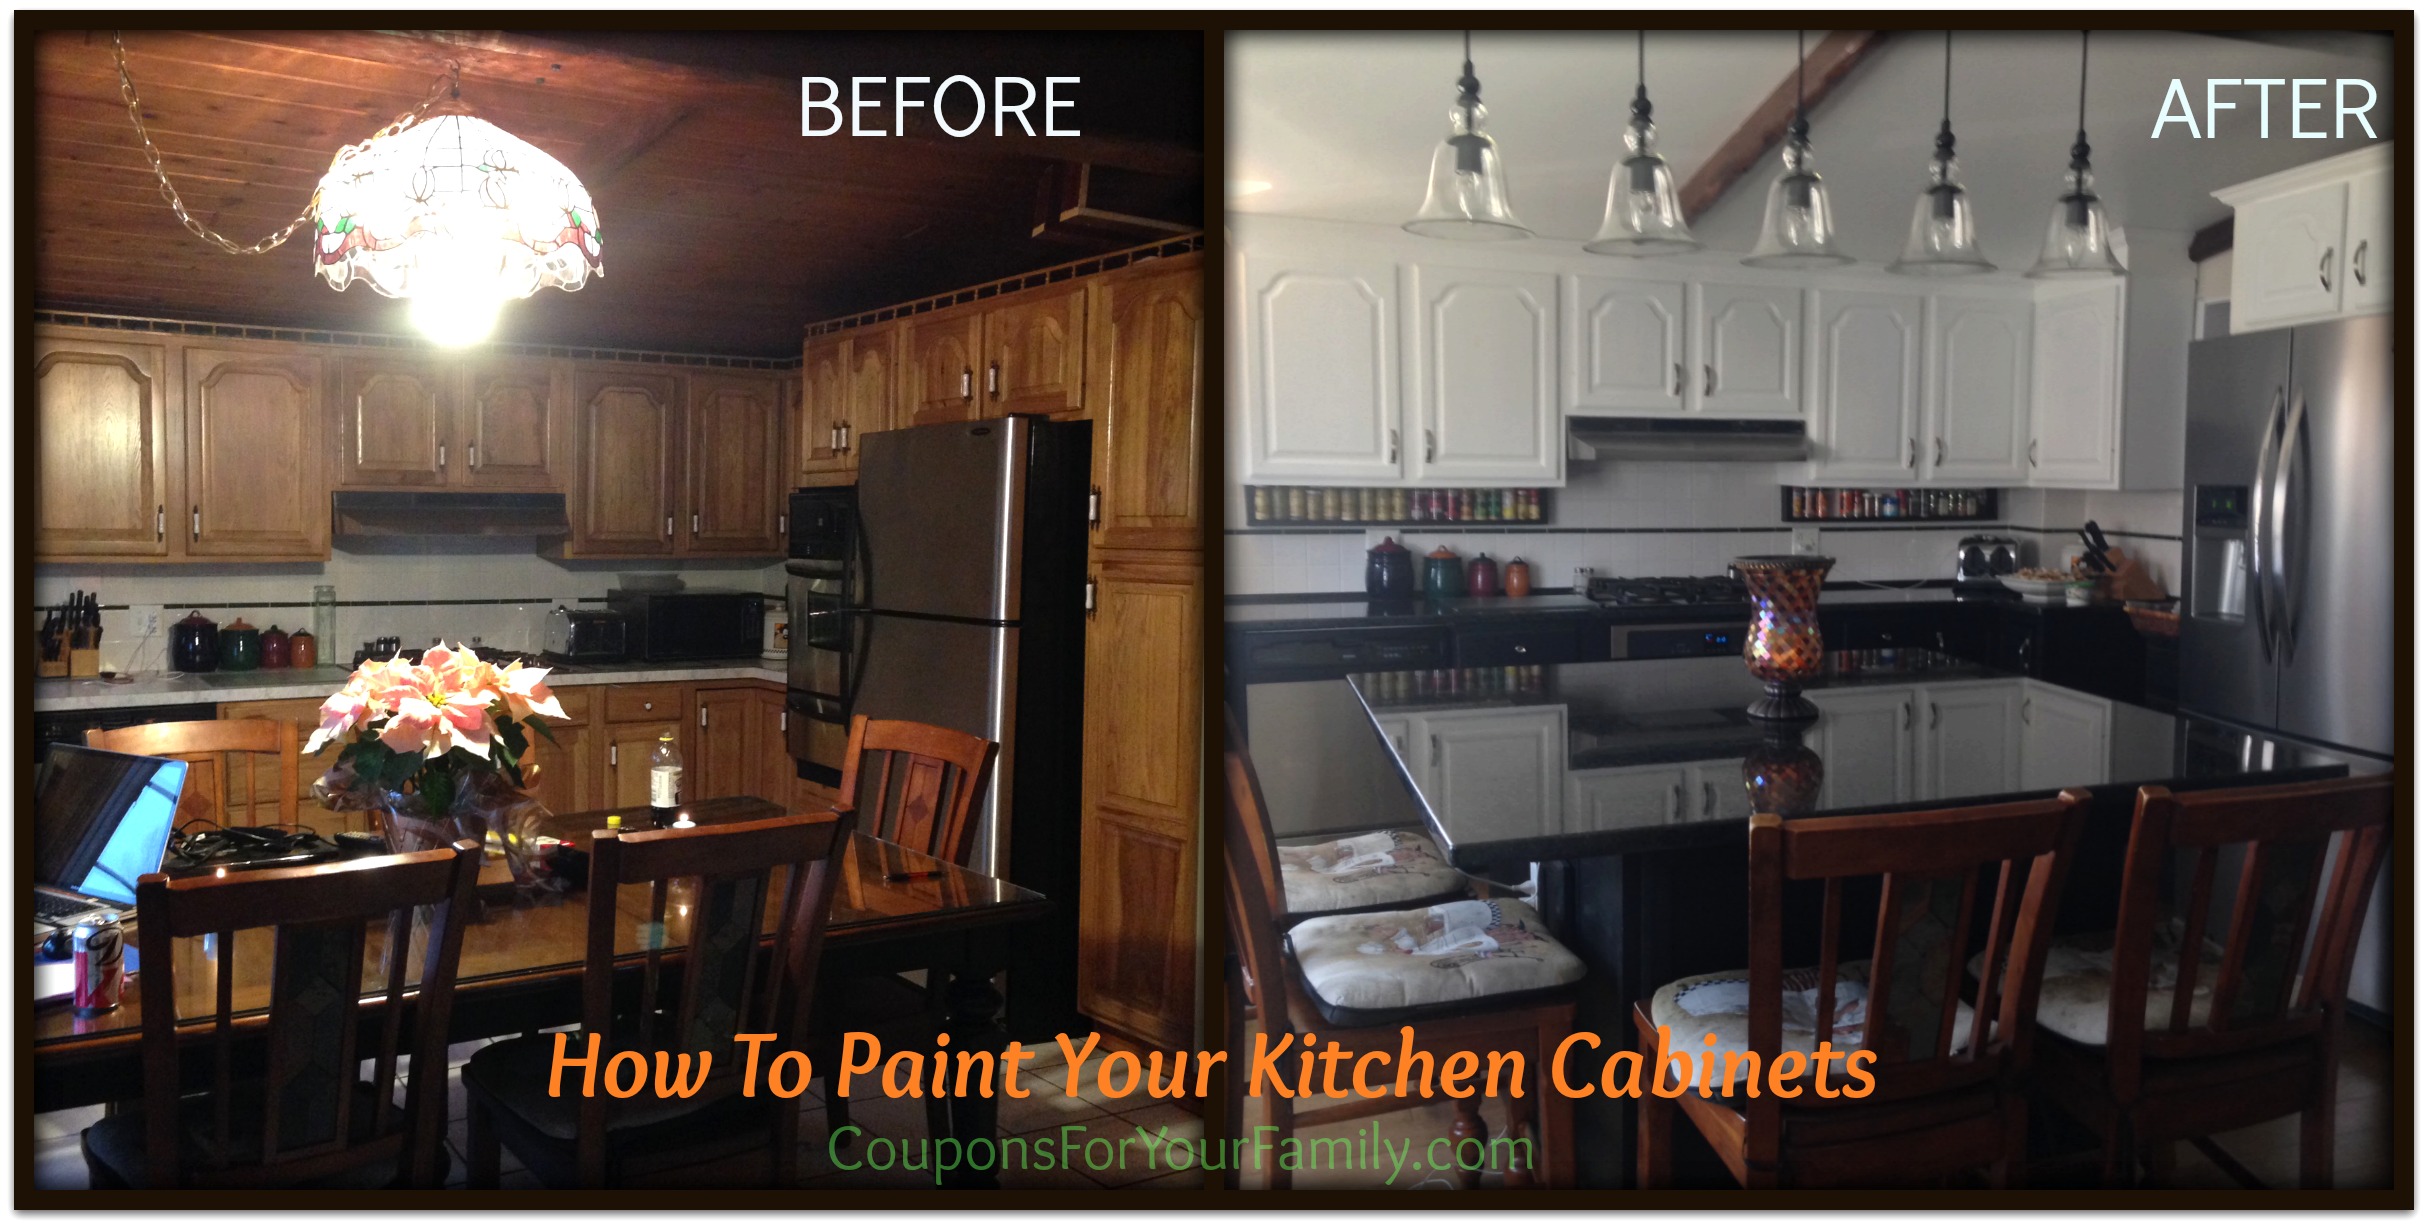 Do It Yourself and Save Project: How to Paint Oak Kitchen 